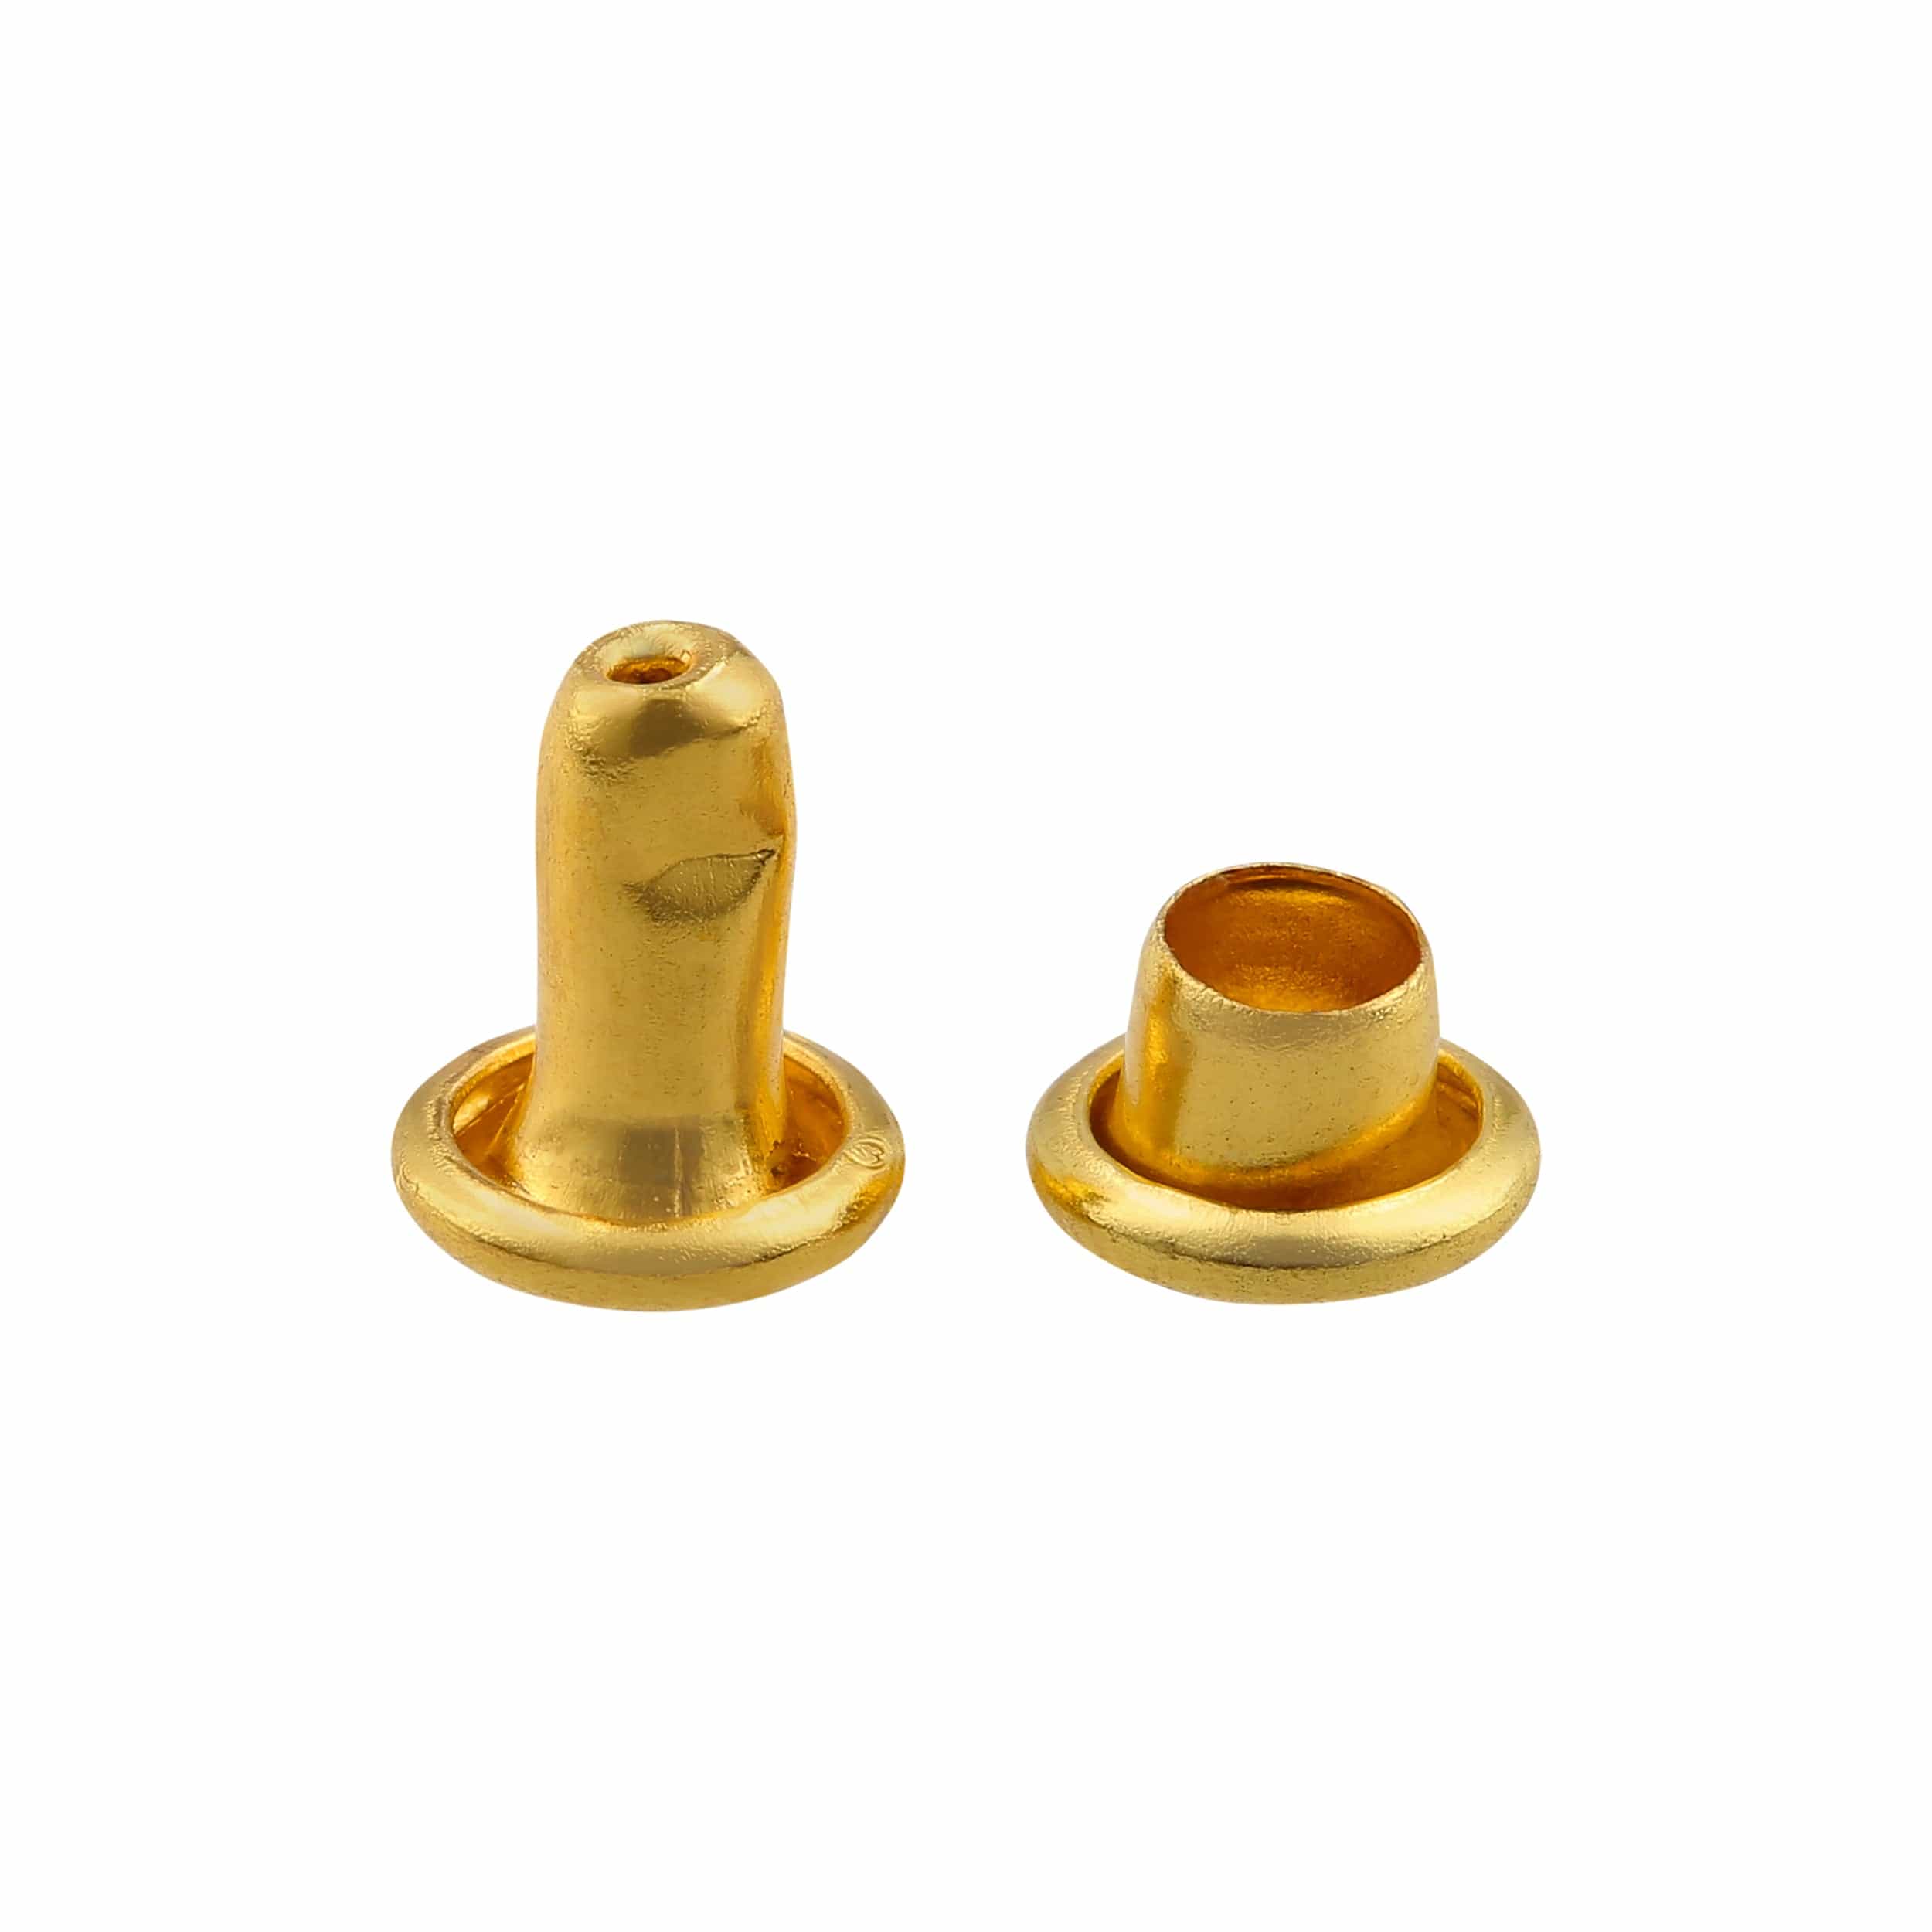 Ohio Travel Bag Fasteners 6mm Gold, Double Cap Jiffy Rivet, Steel, #A-340-GOLD A-340-GOLD